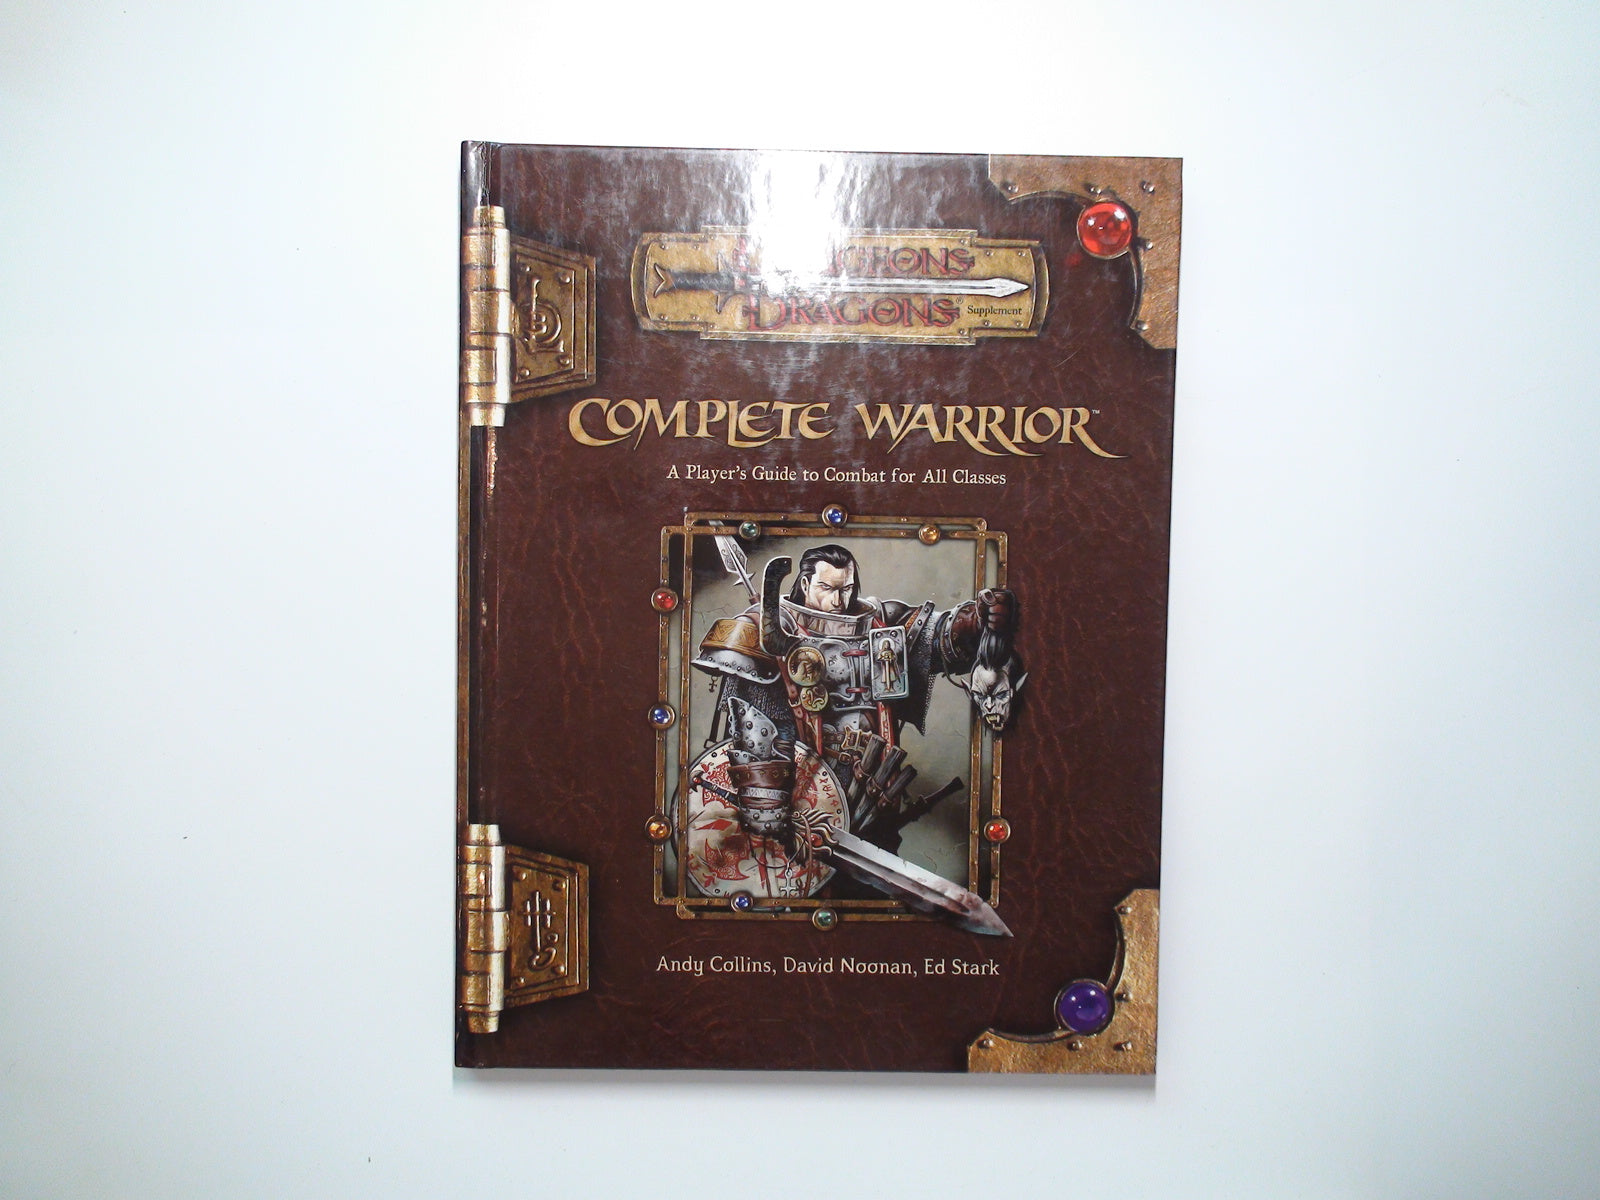 Complete Warrior, Andy Collins, Dungeons and Dragons 3.5, 1st Printing, 2004